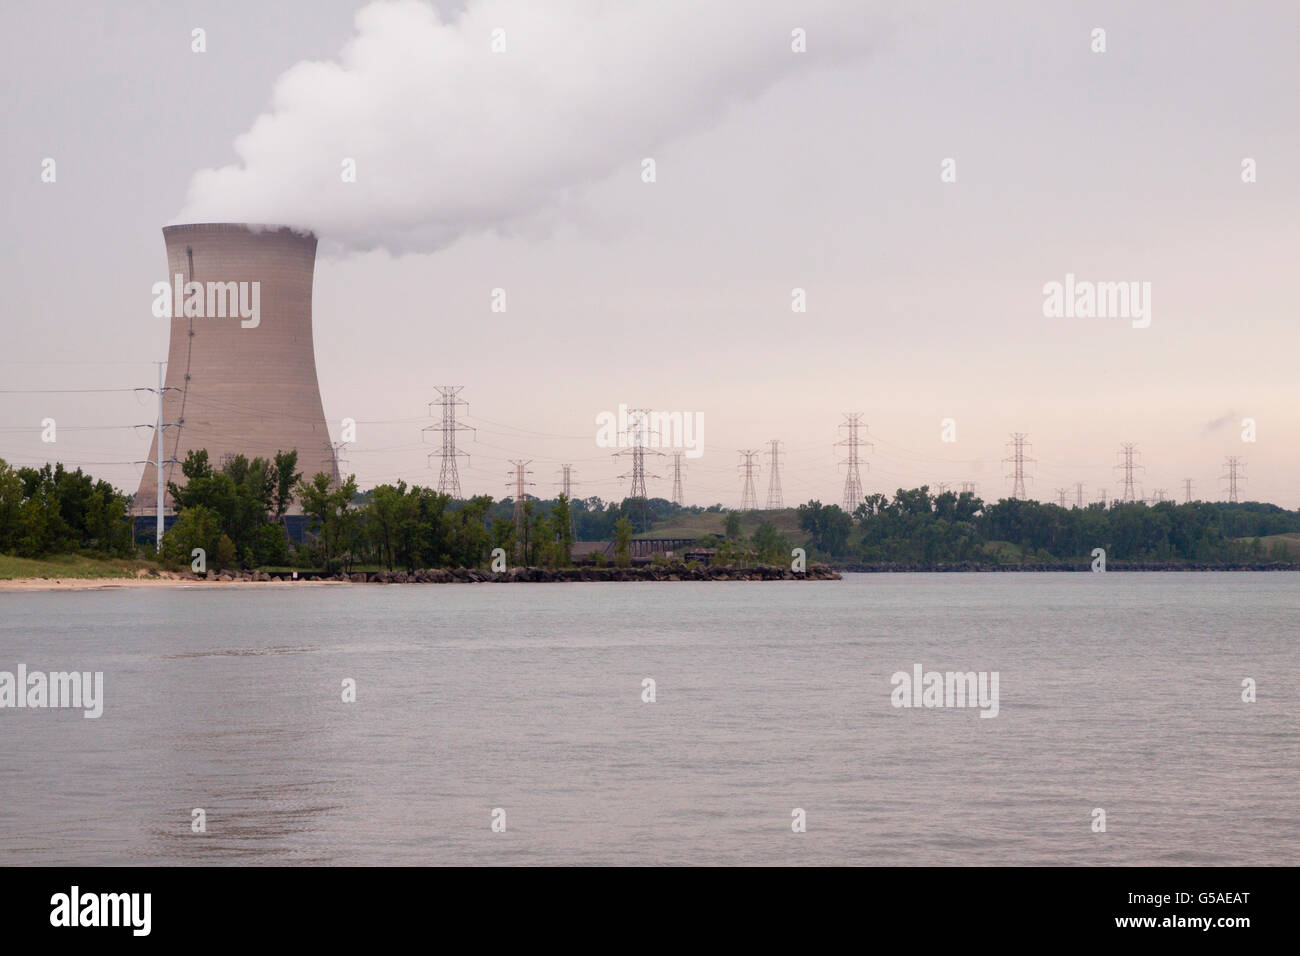 Smokestack of Nuclear Power Plant With Power Lines Stock Photo